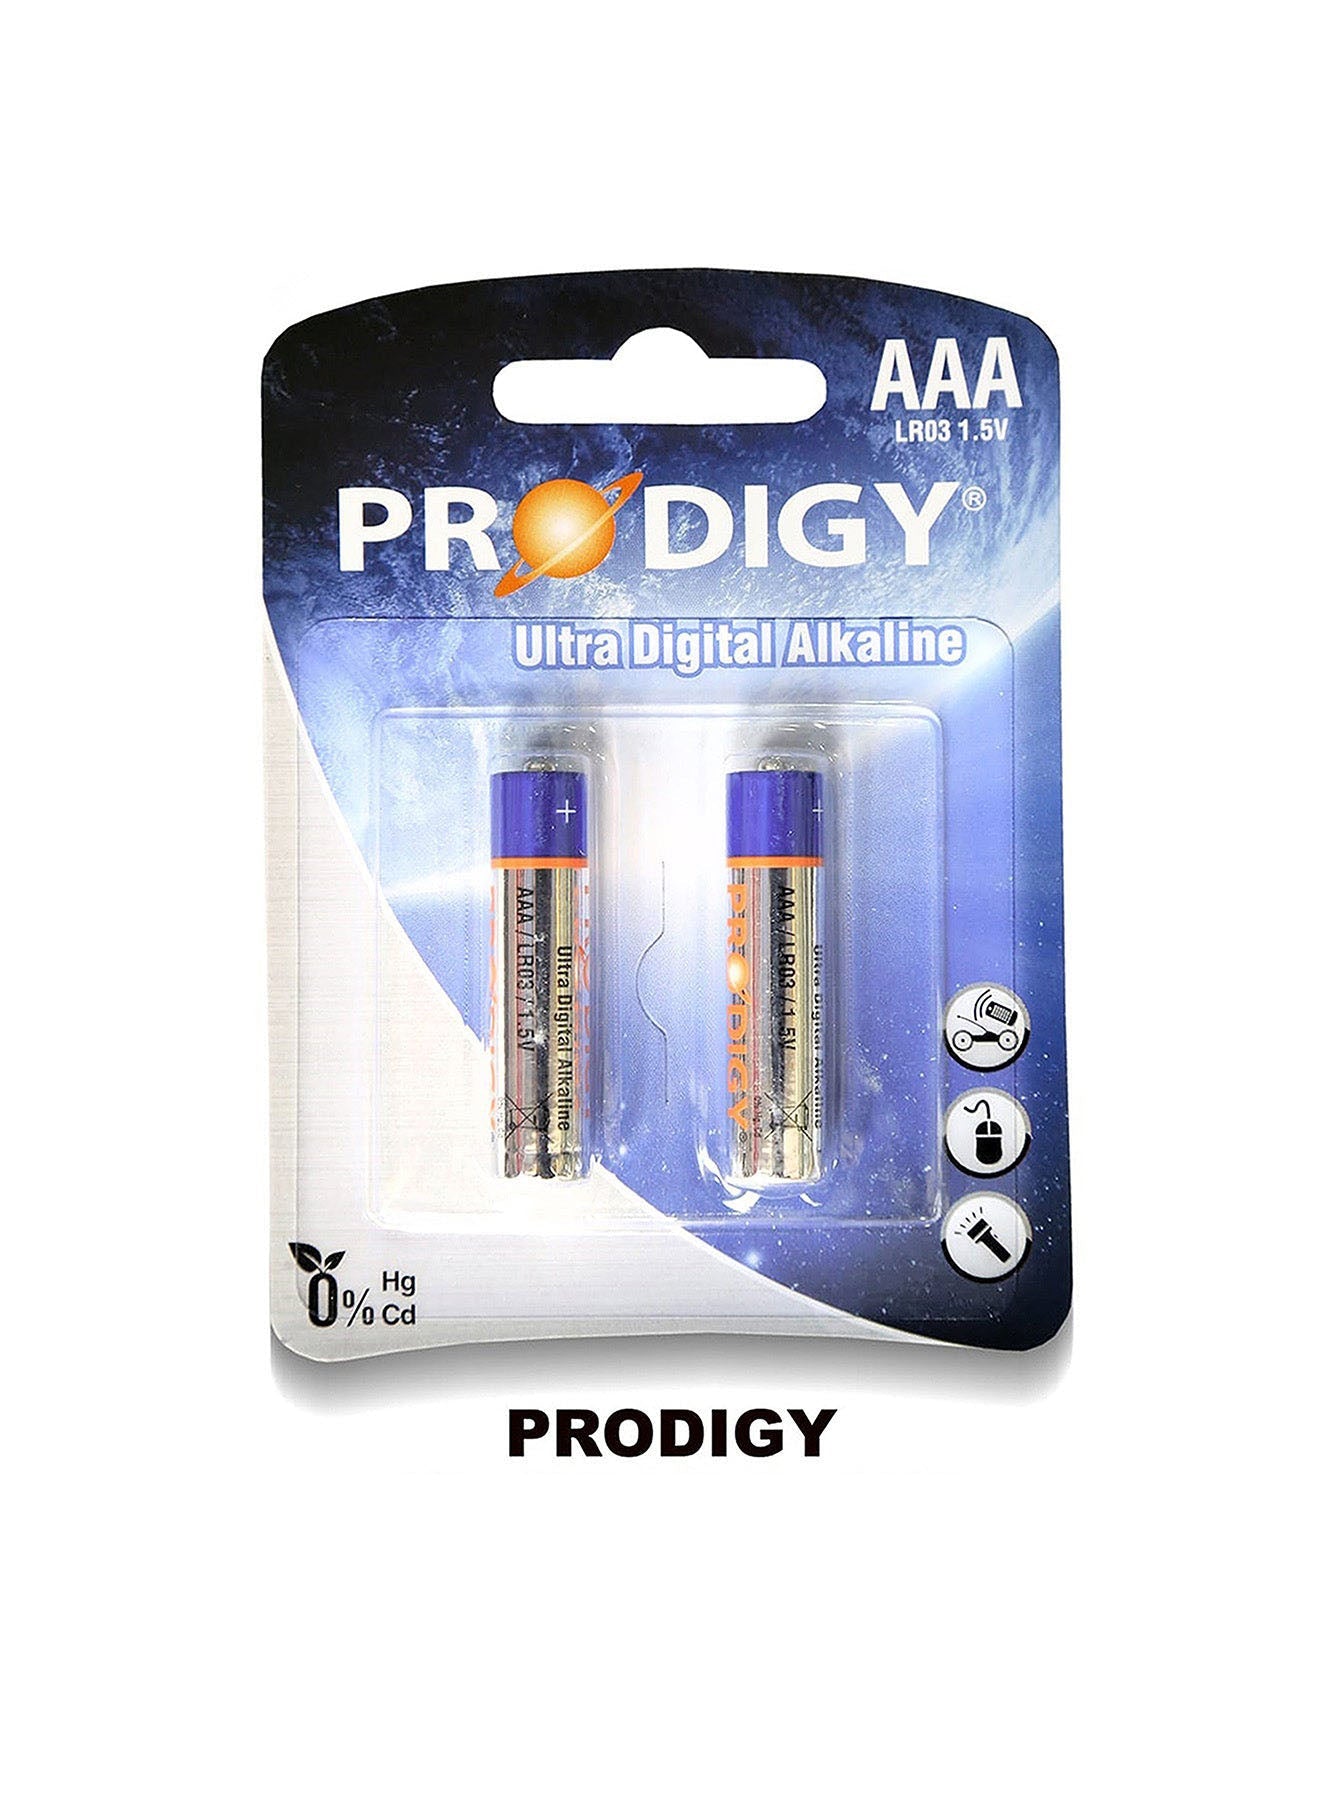 Prodigy Alkaline LR03UD AAA2 Value Pack of 12 